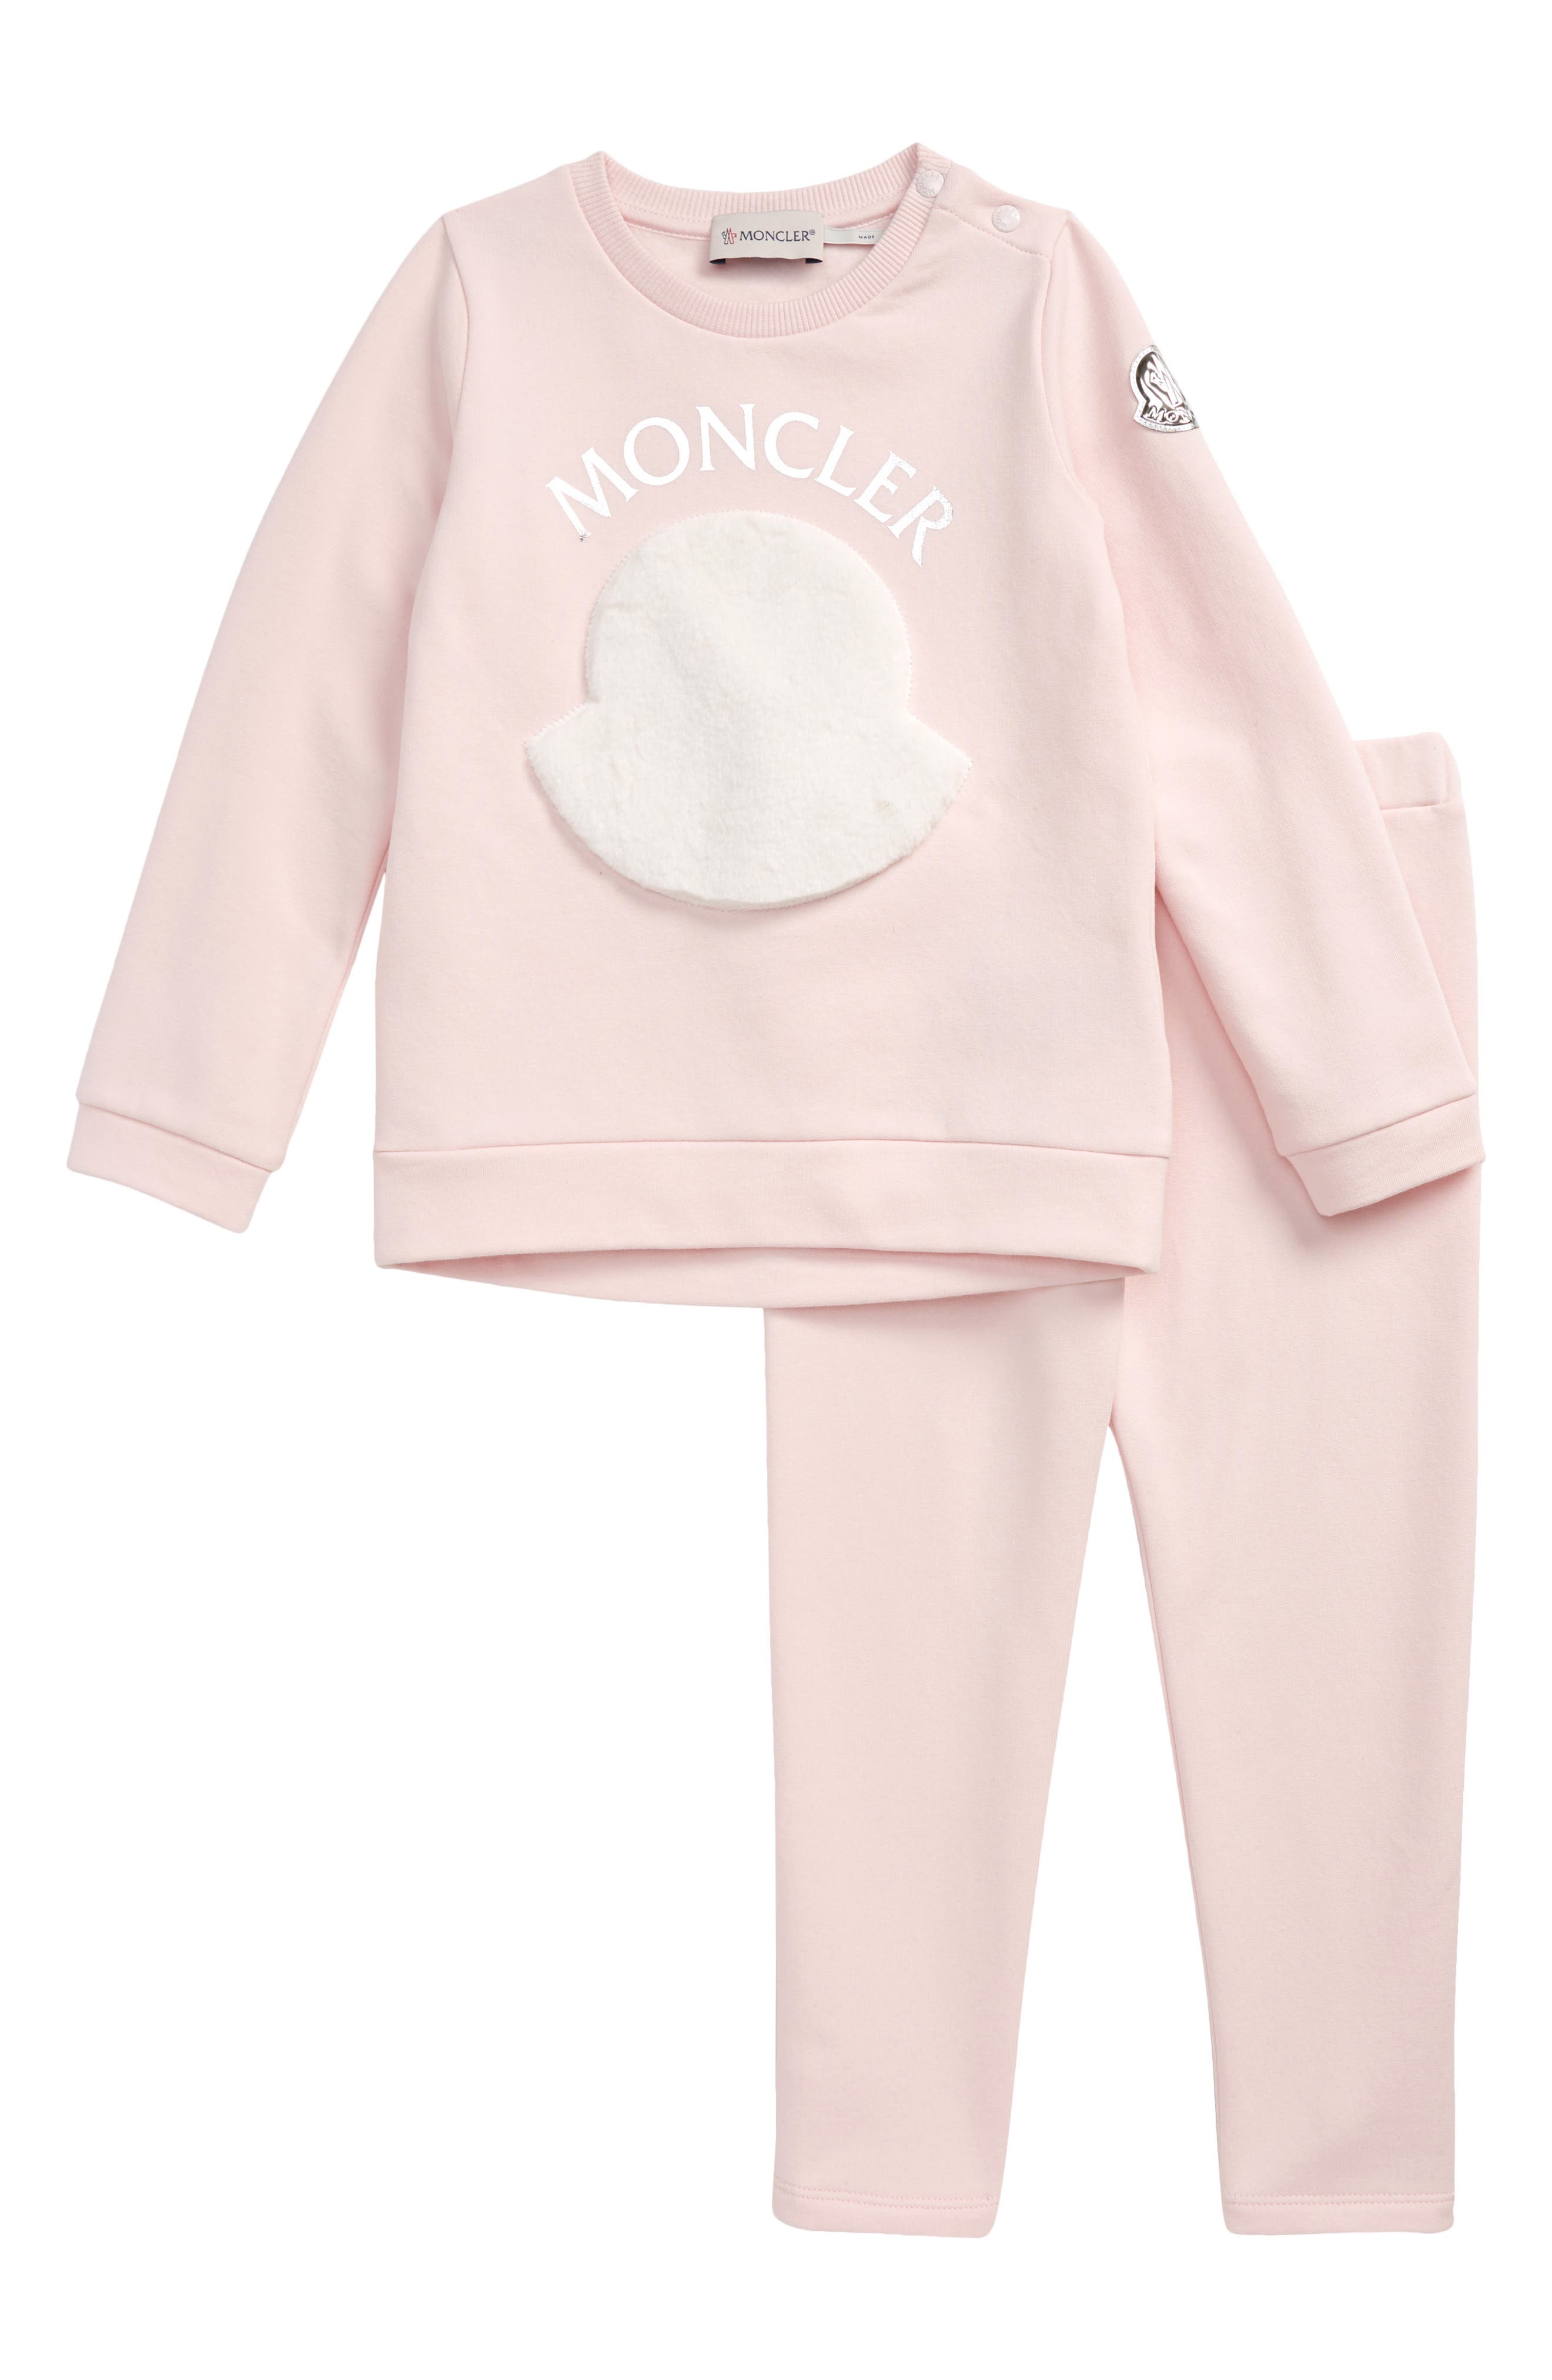 moncler baby outfits